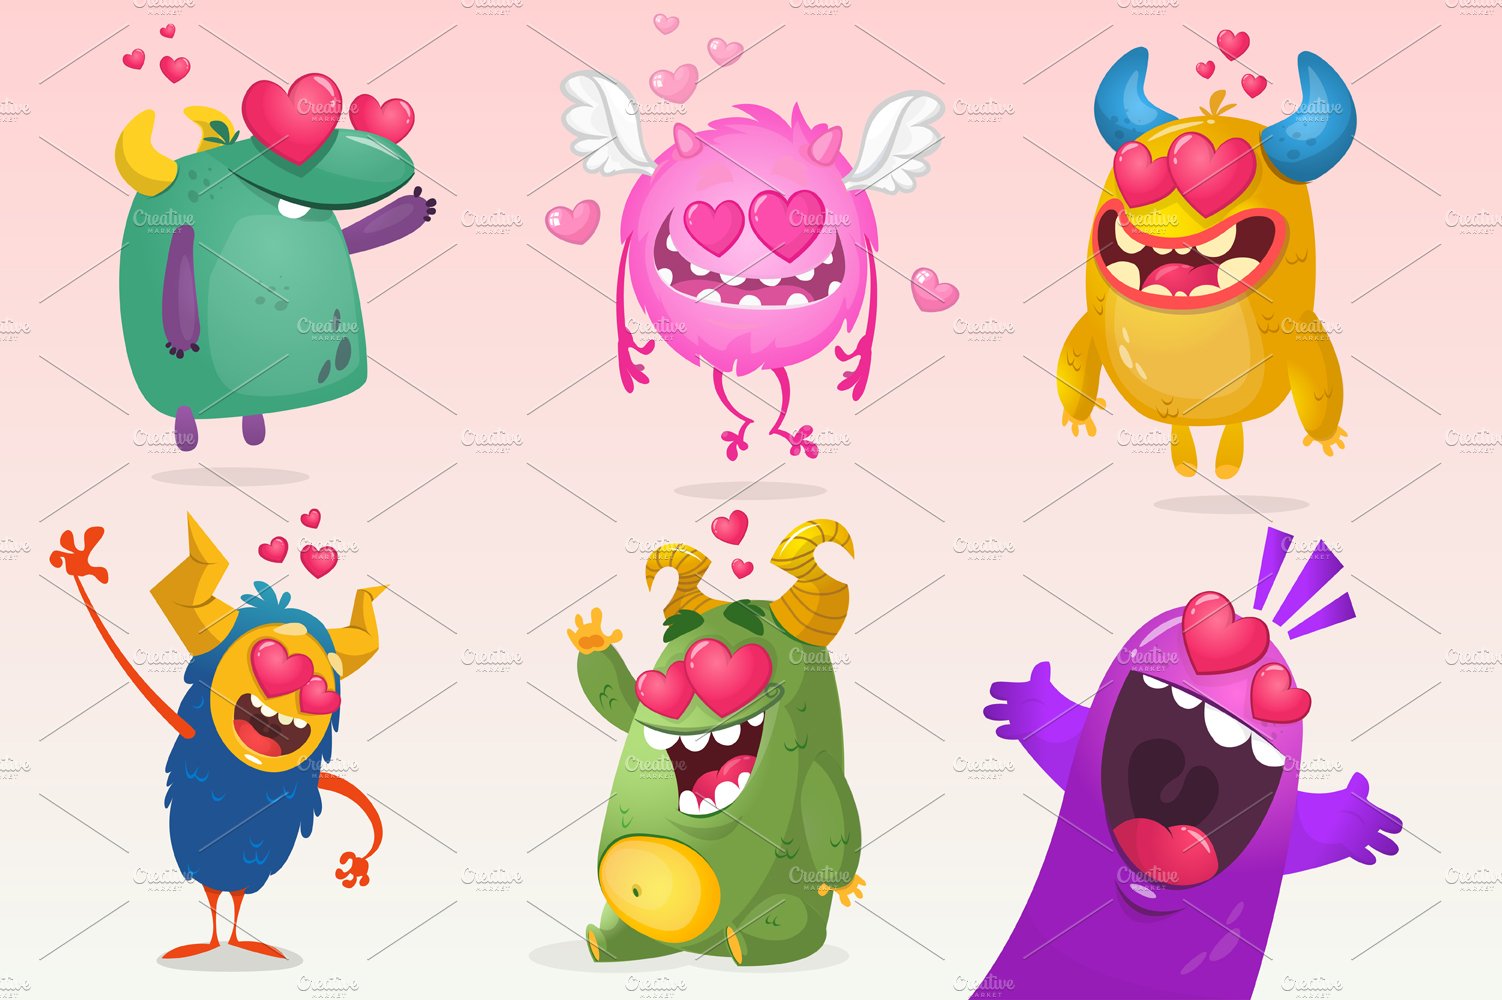 Cartoon monsters for Valentines Day cover image.